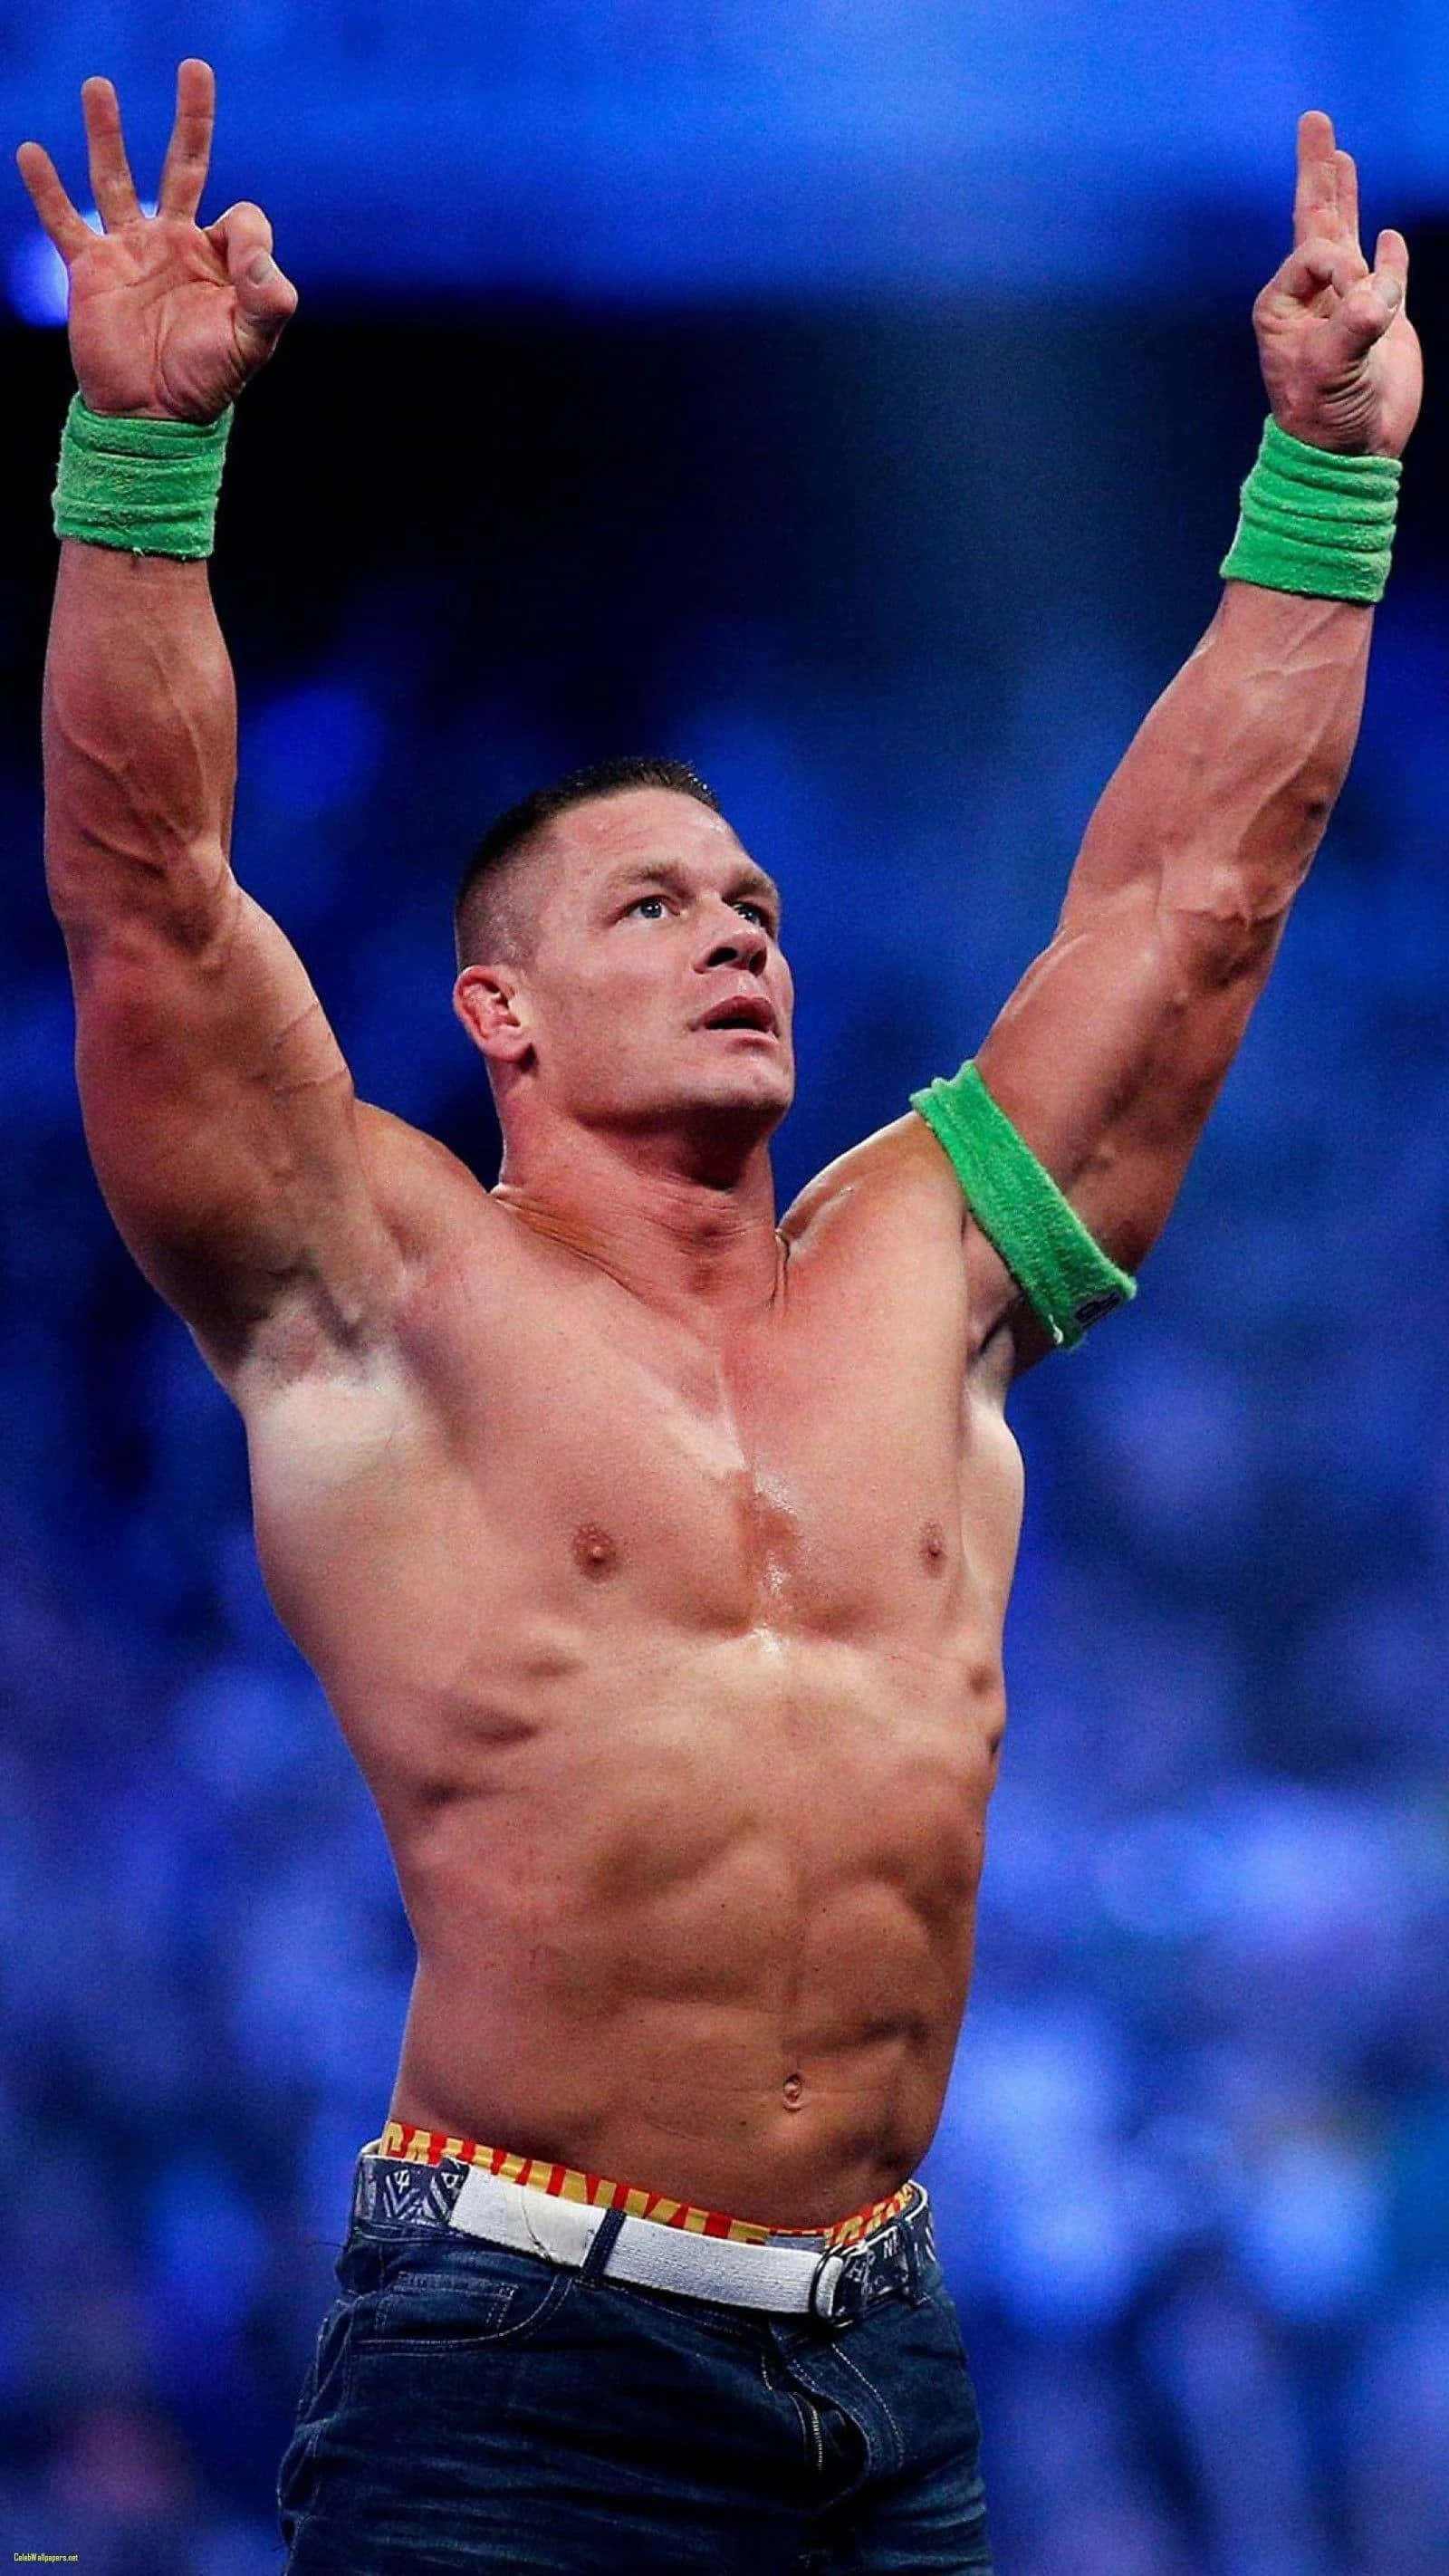 the year was 2018, and John Cena was doing his new finisher : r/Wrasslin